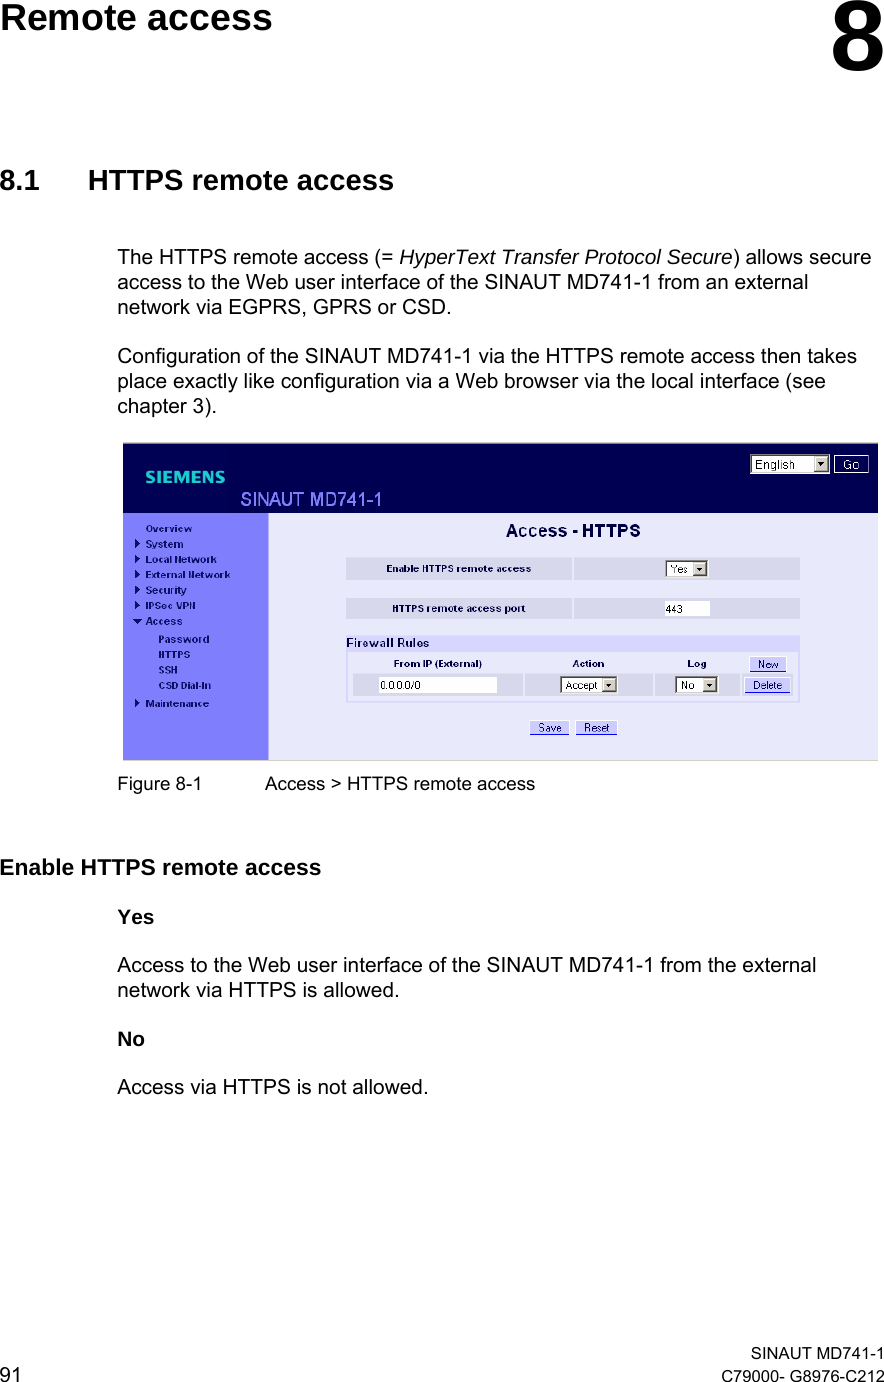   SINAUT MD741-1 91  C79000- G8976-C212    Remote access  88.1  HTTPS remote access The HTTPS remote access (= HyperText Transfer Protocol Secure) allows secure access to the Web user interface of the SINAUT MD741-1 from an external network via EGPRS, GPRS or CSD.  Configuration of the SINAUT MD741-1 via the HTTPS remote access then takes place exactly like configuration via a Web browser via the local interface (see chapter 3).    Figure 8-1  Access &gt; HTTPS remote access Enable HTTPS remote access  Yes  Access to the Web user interface of the SINAUT MD741-1 from the external network via HTTPS is allowed. No  Access via HTTPS is not allowed. 